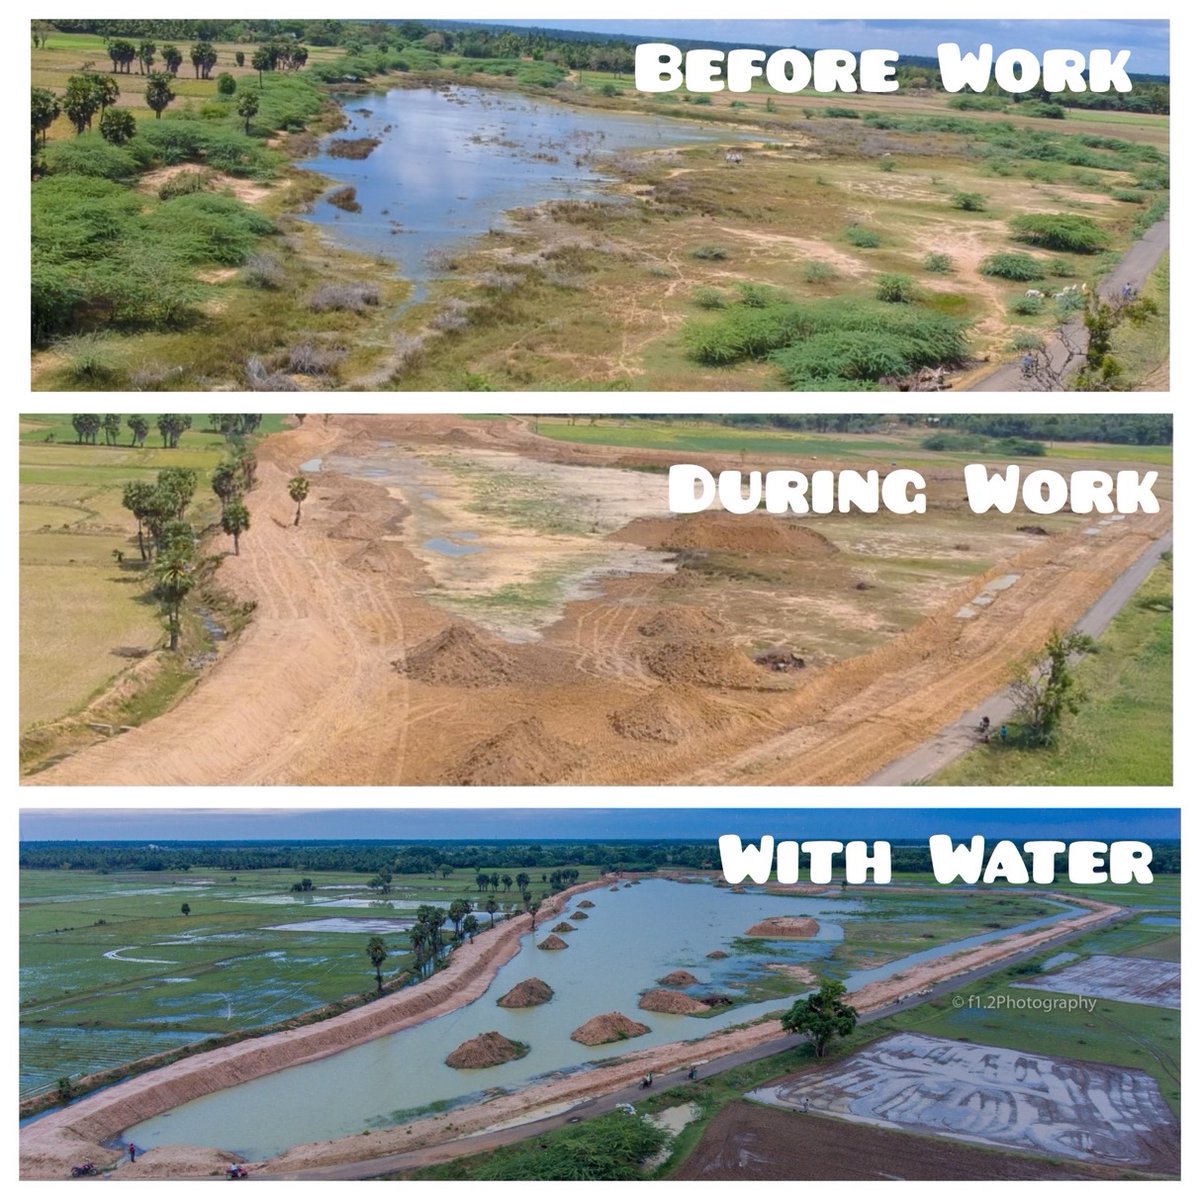 BounceBackDelta! Cauvery, India 🇮🇳!

Before and After rejuvenation pictures of Perumagalur lake.

Location:  Perumagaloor Panchayat, Thanjavur district, Tamilnadu.

Area of the lake: 18 acres. 

Water Saved: 25 crores litres.

Bravo @being_nimal